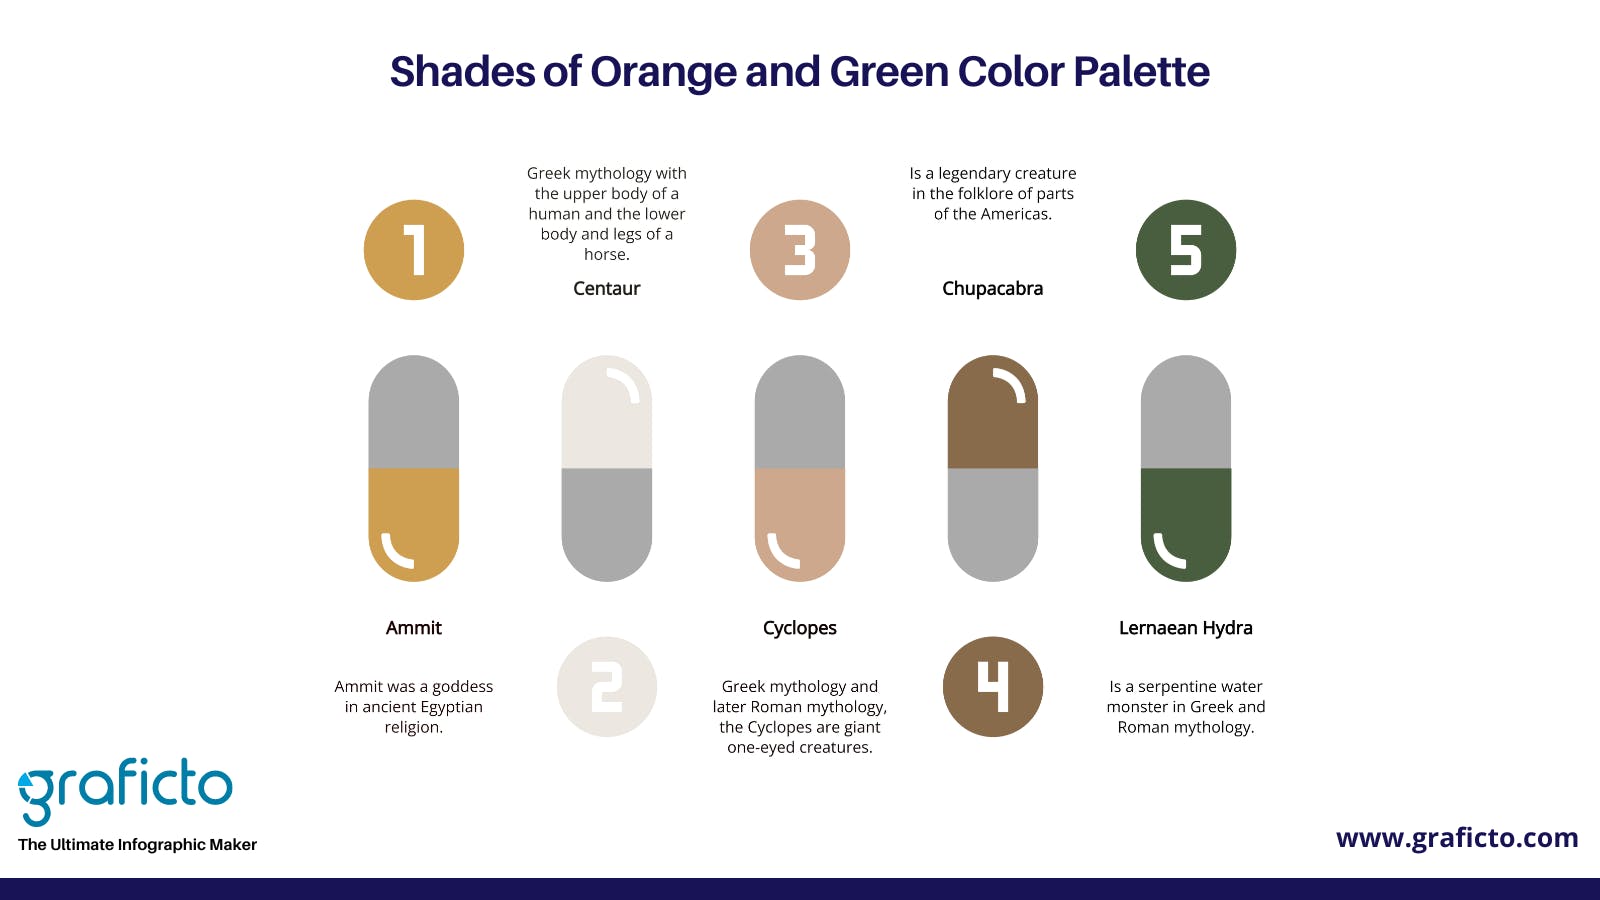 Shades of Orange and Green graficto Christmas Color Palettes